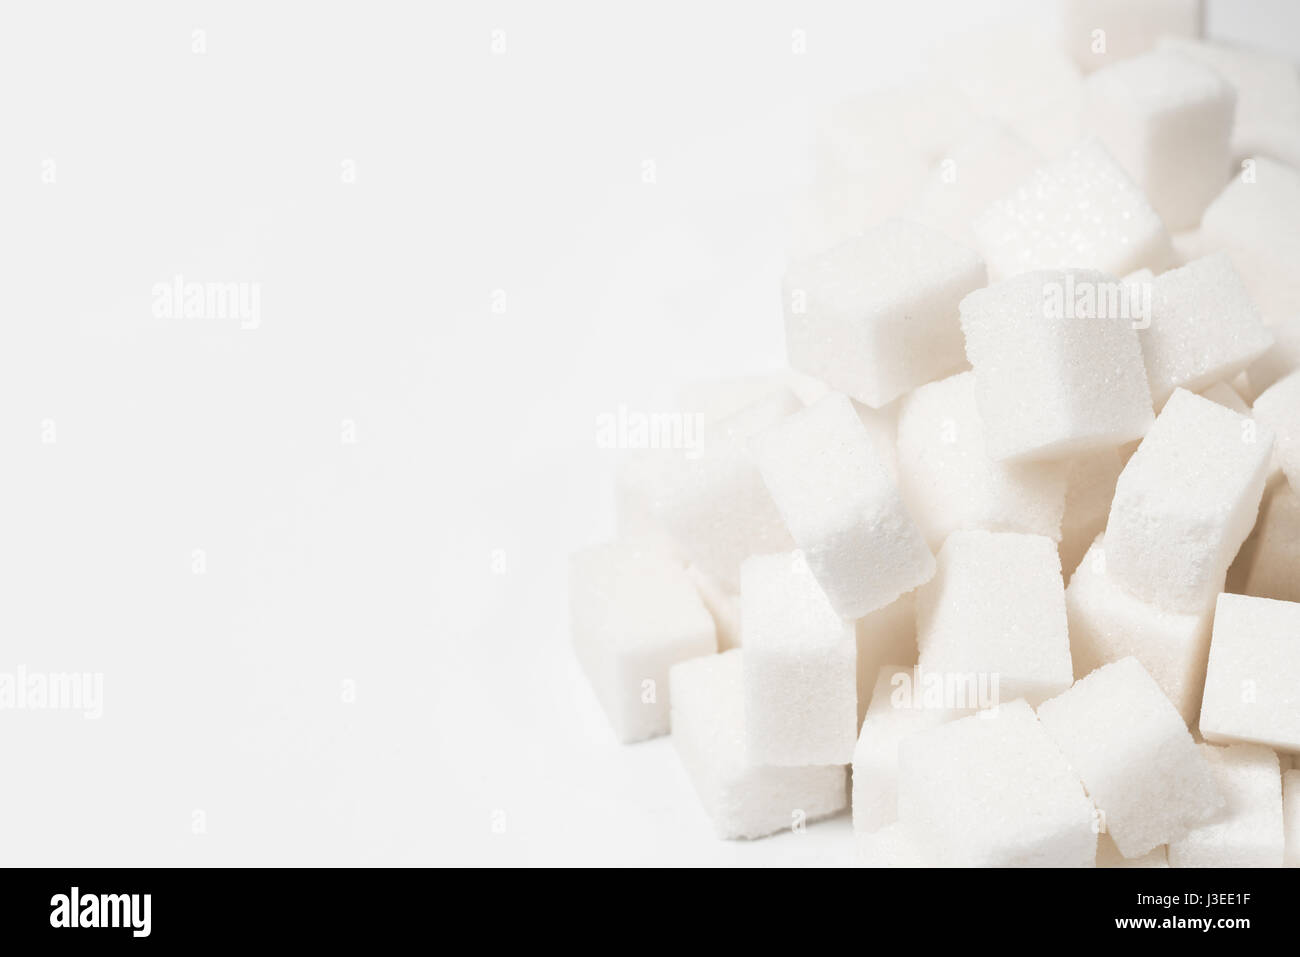 Sugar background sweet food ingredient with a close up of a pile of delicious white lumps of cubes as a symbol of cooking and baking and the diet health risks related to diabetes and calorie intake. Stock Photo